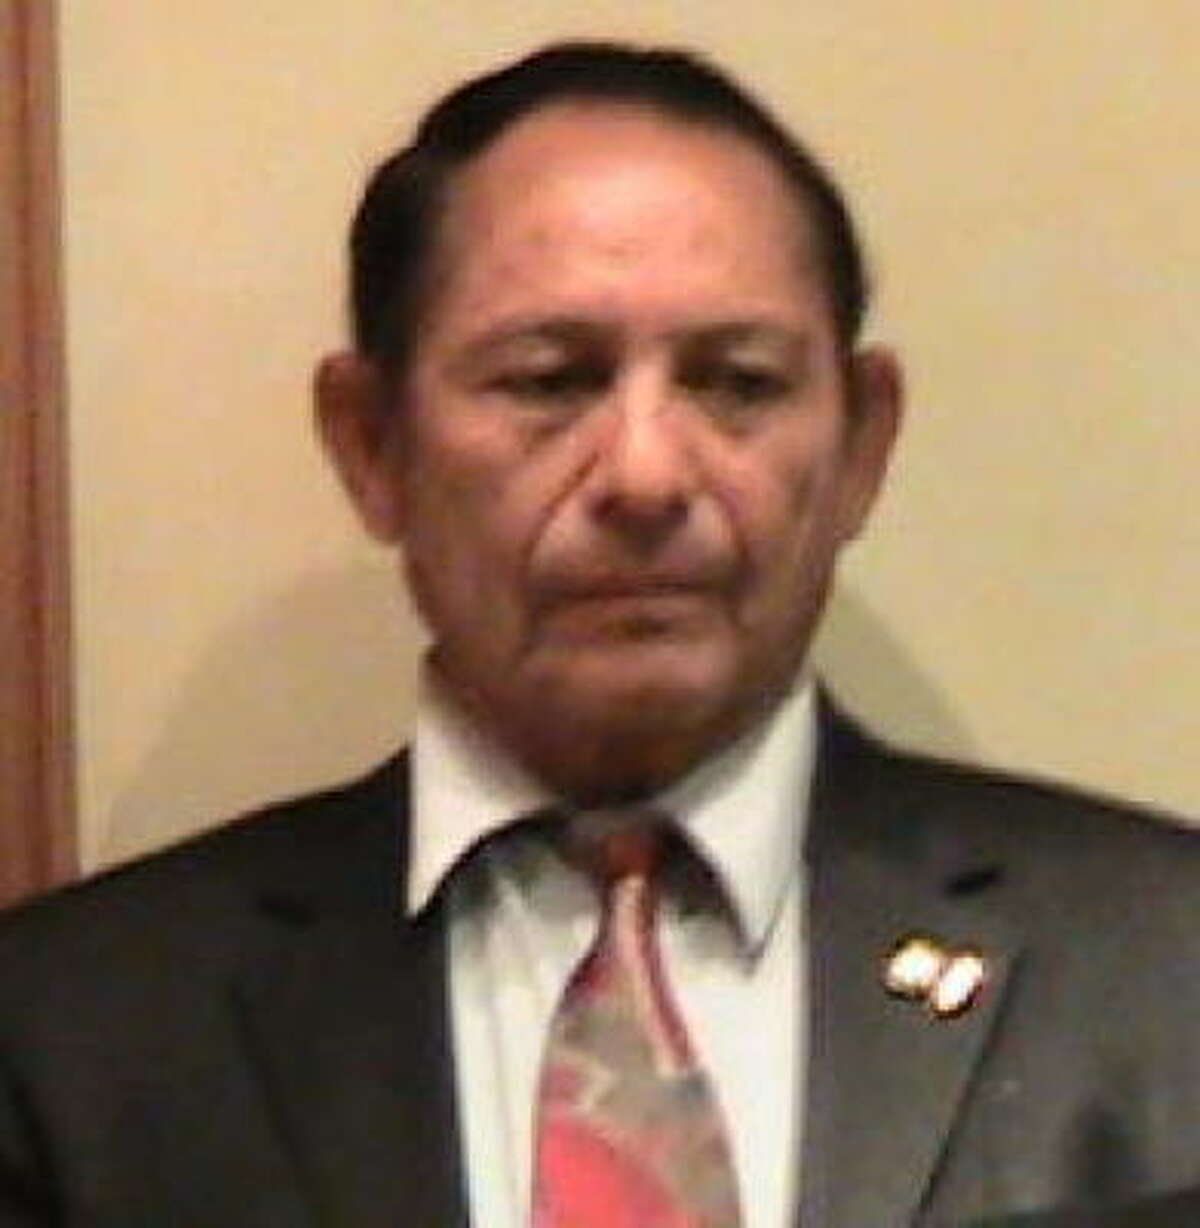 Manuel Farfán had taken office Jan. 1 with the change of city and state governments.